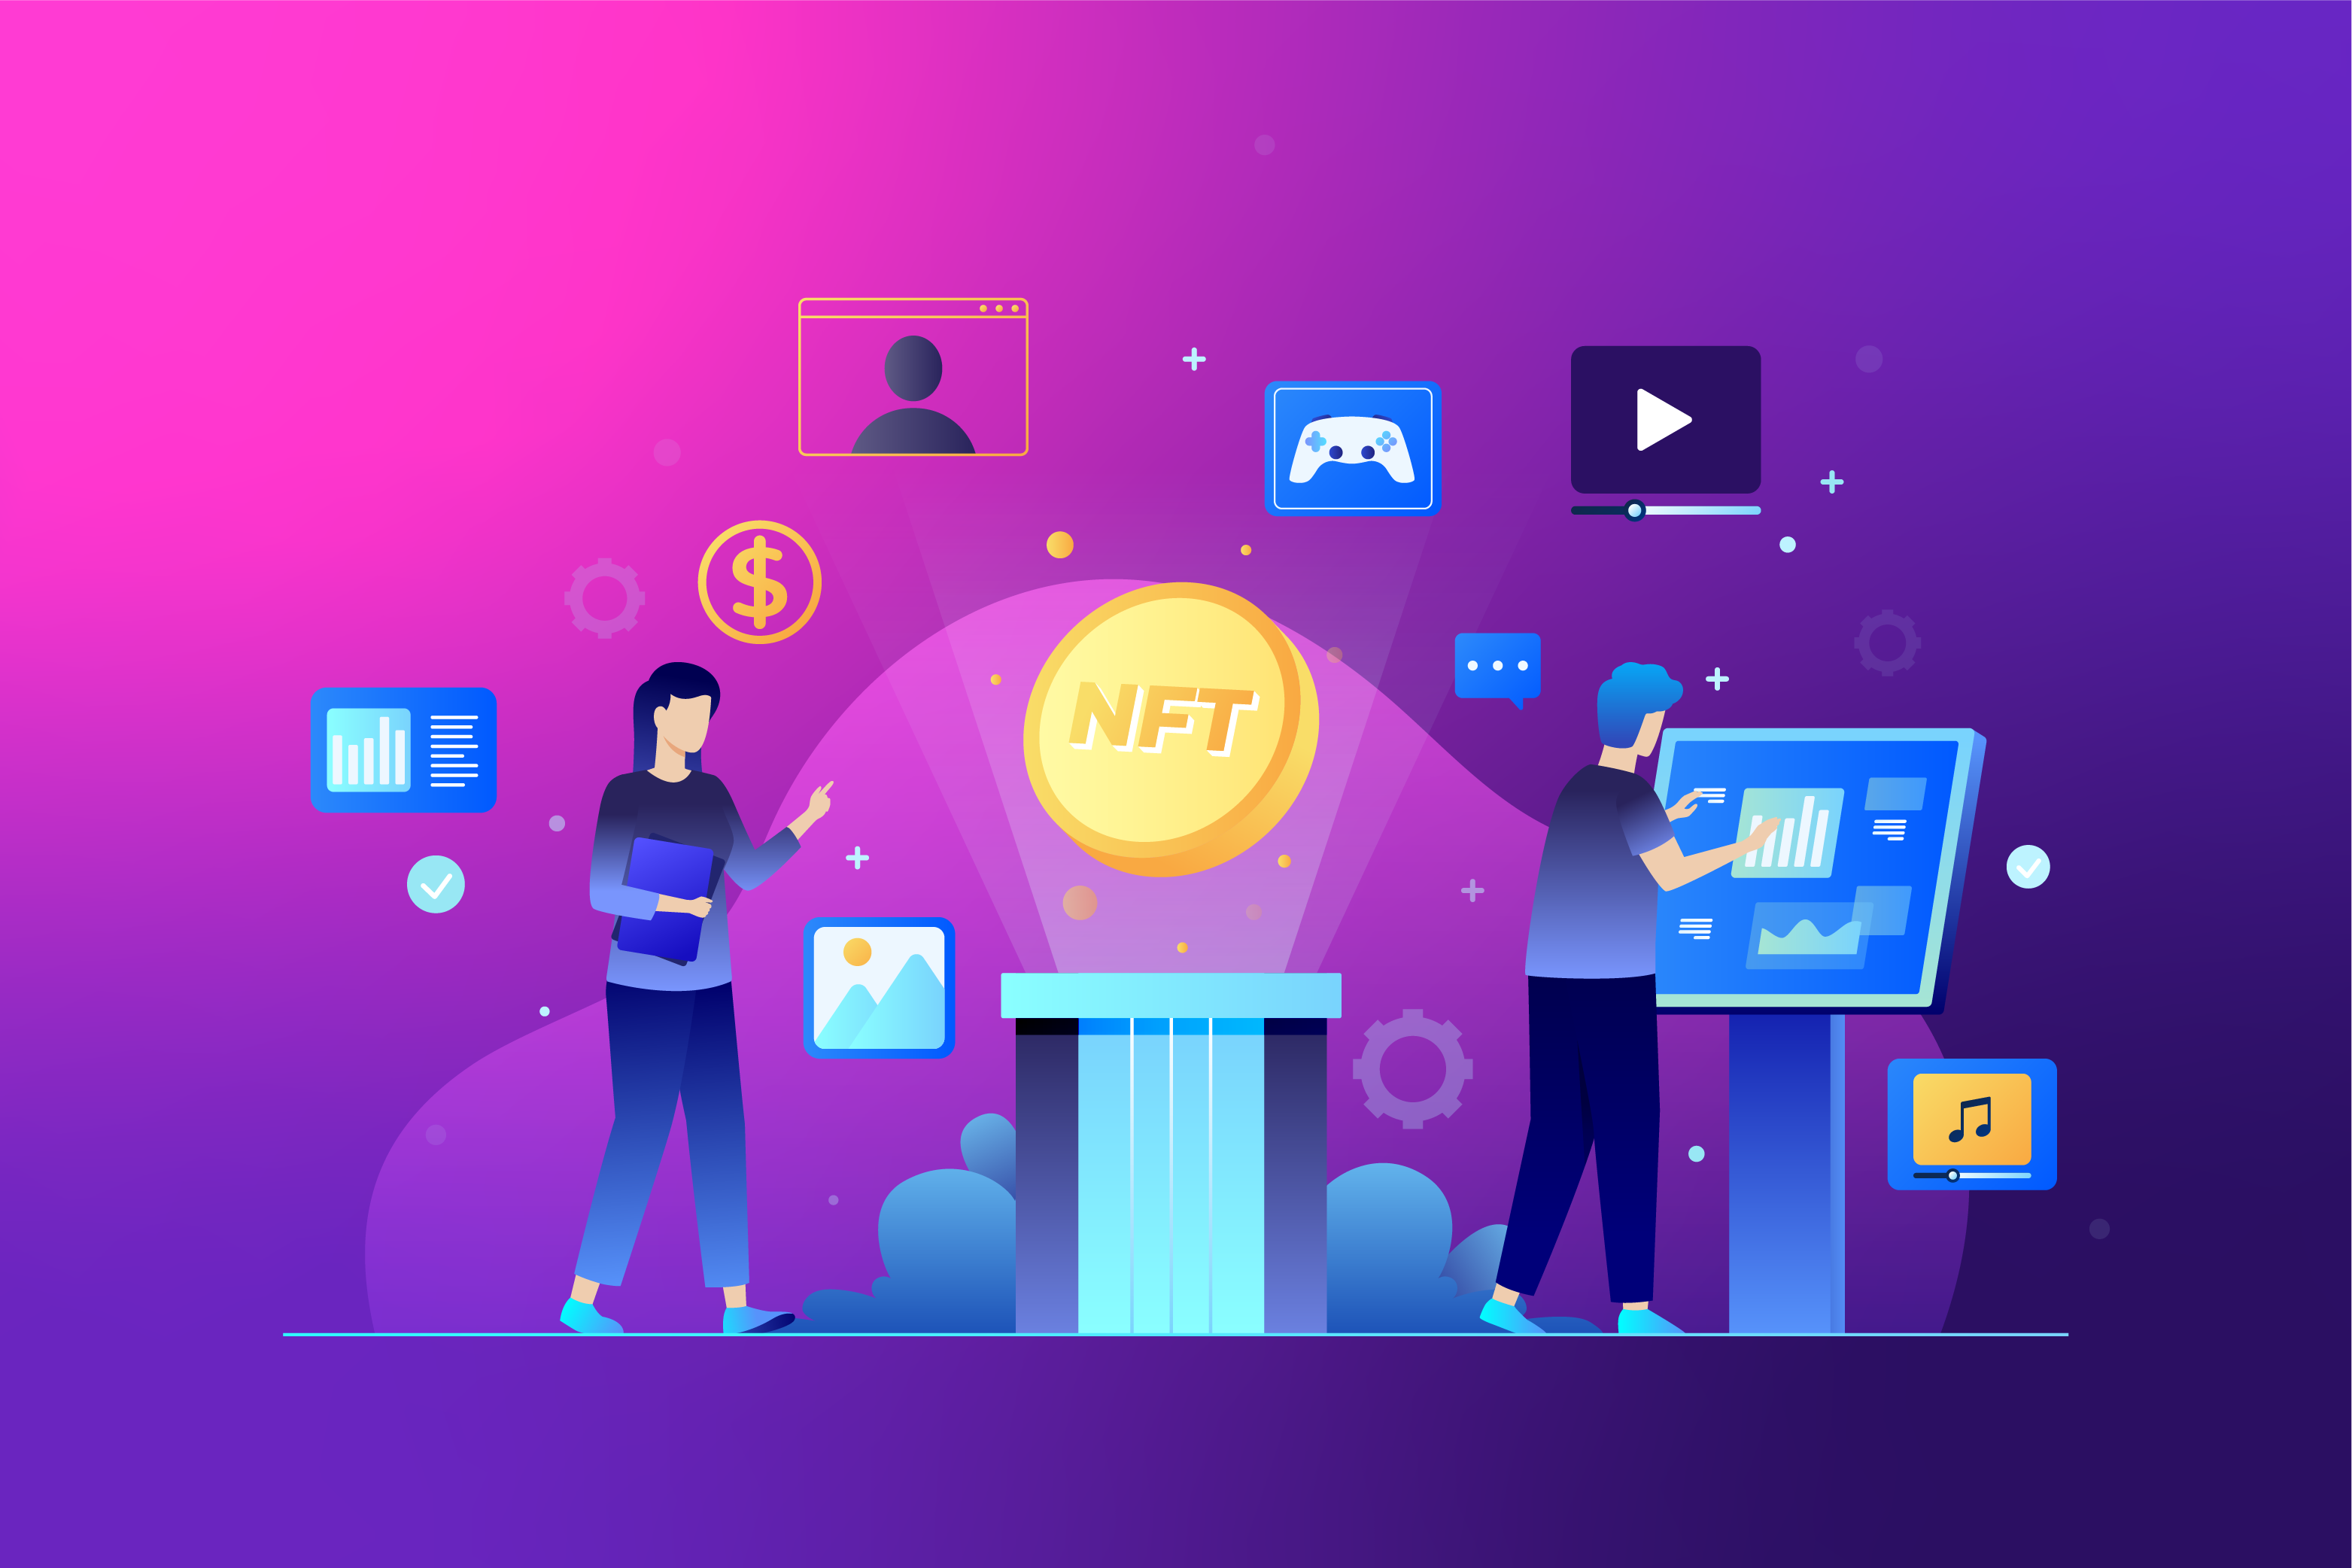 Illustration of the Metaverse and NFT's